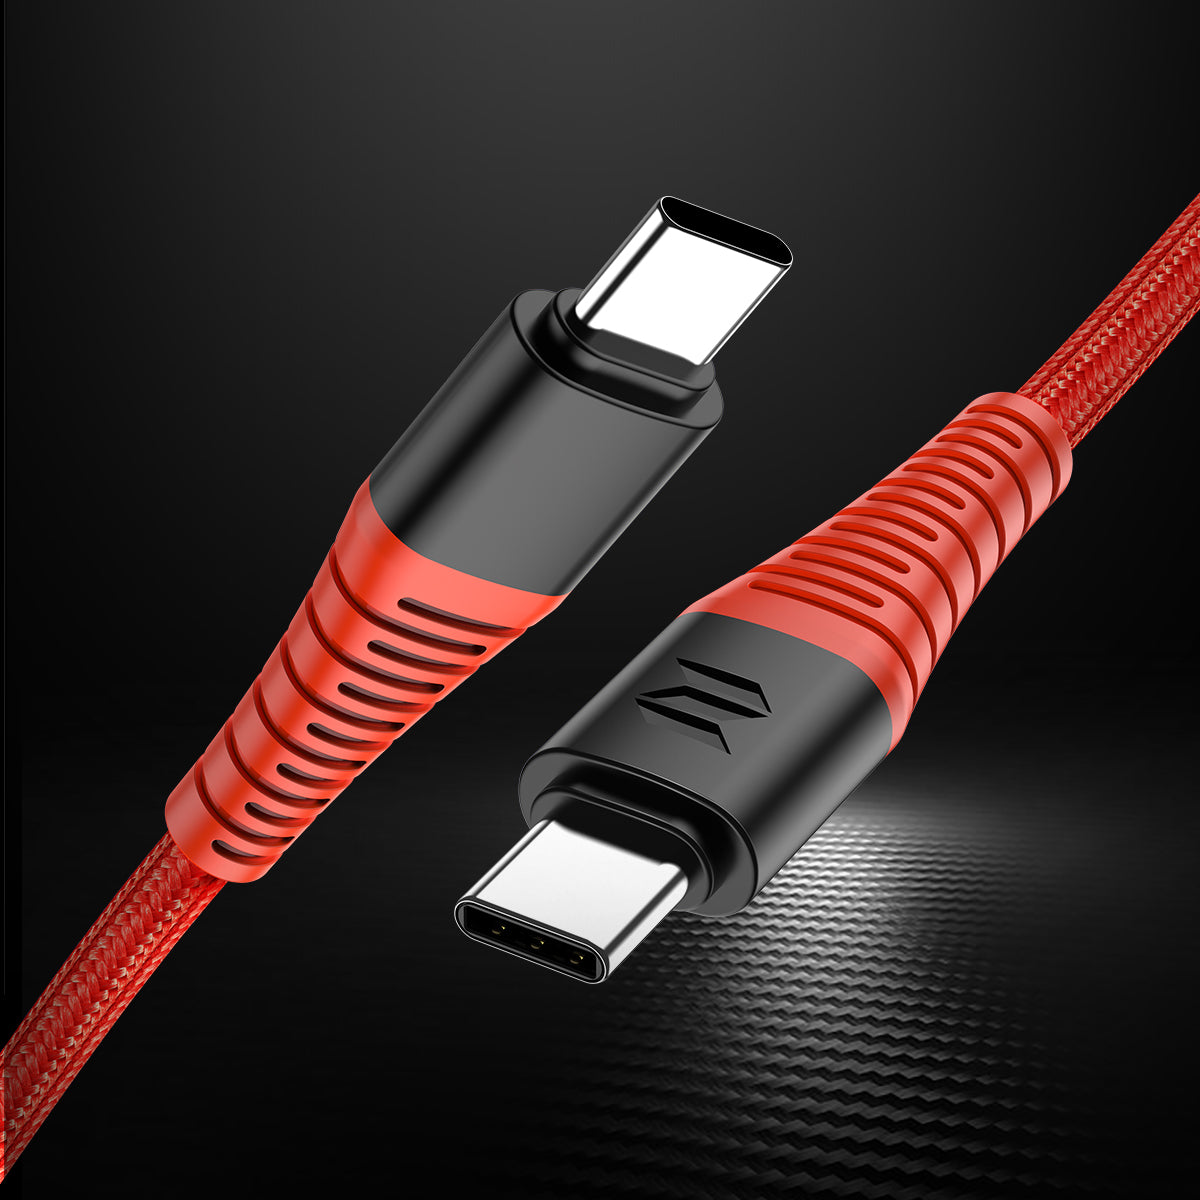 Rock selected Hi-tensile Fast charge Cables C-C